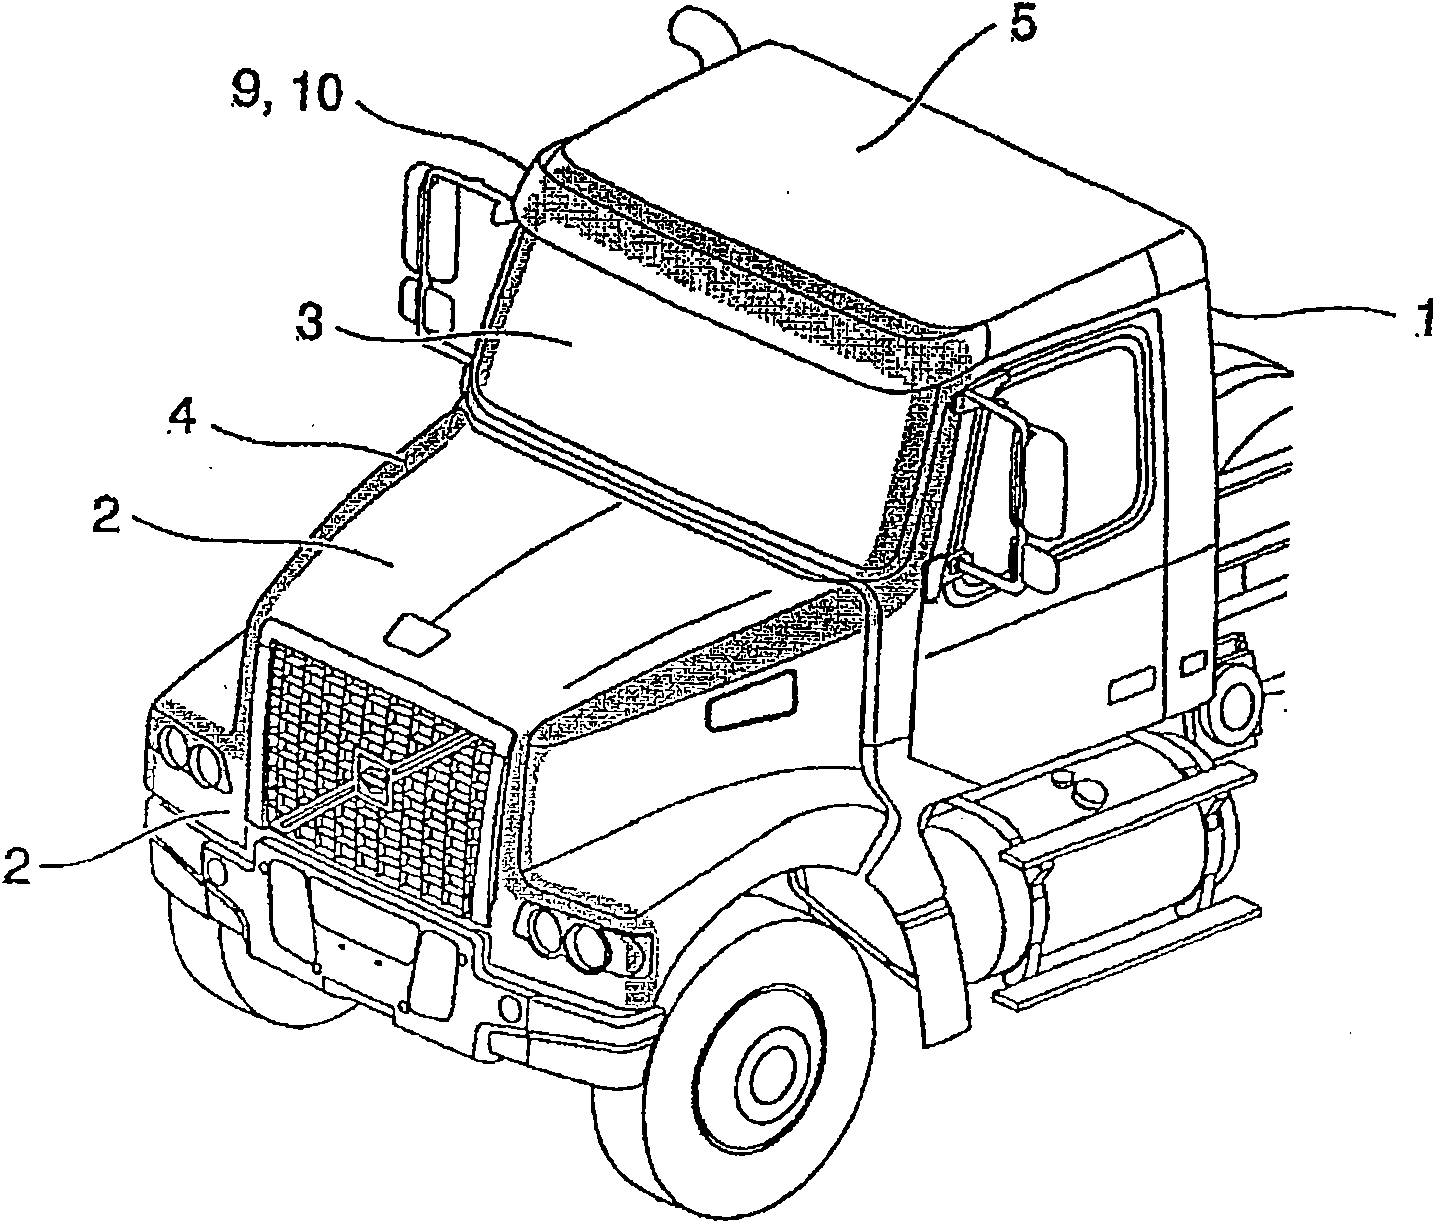 Auxiliary cooler for truck cap and a vehicle provided with a cooling member